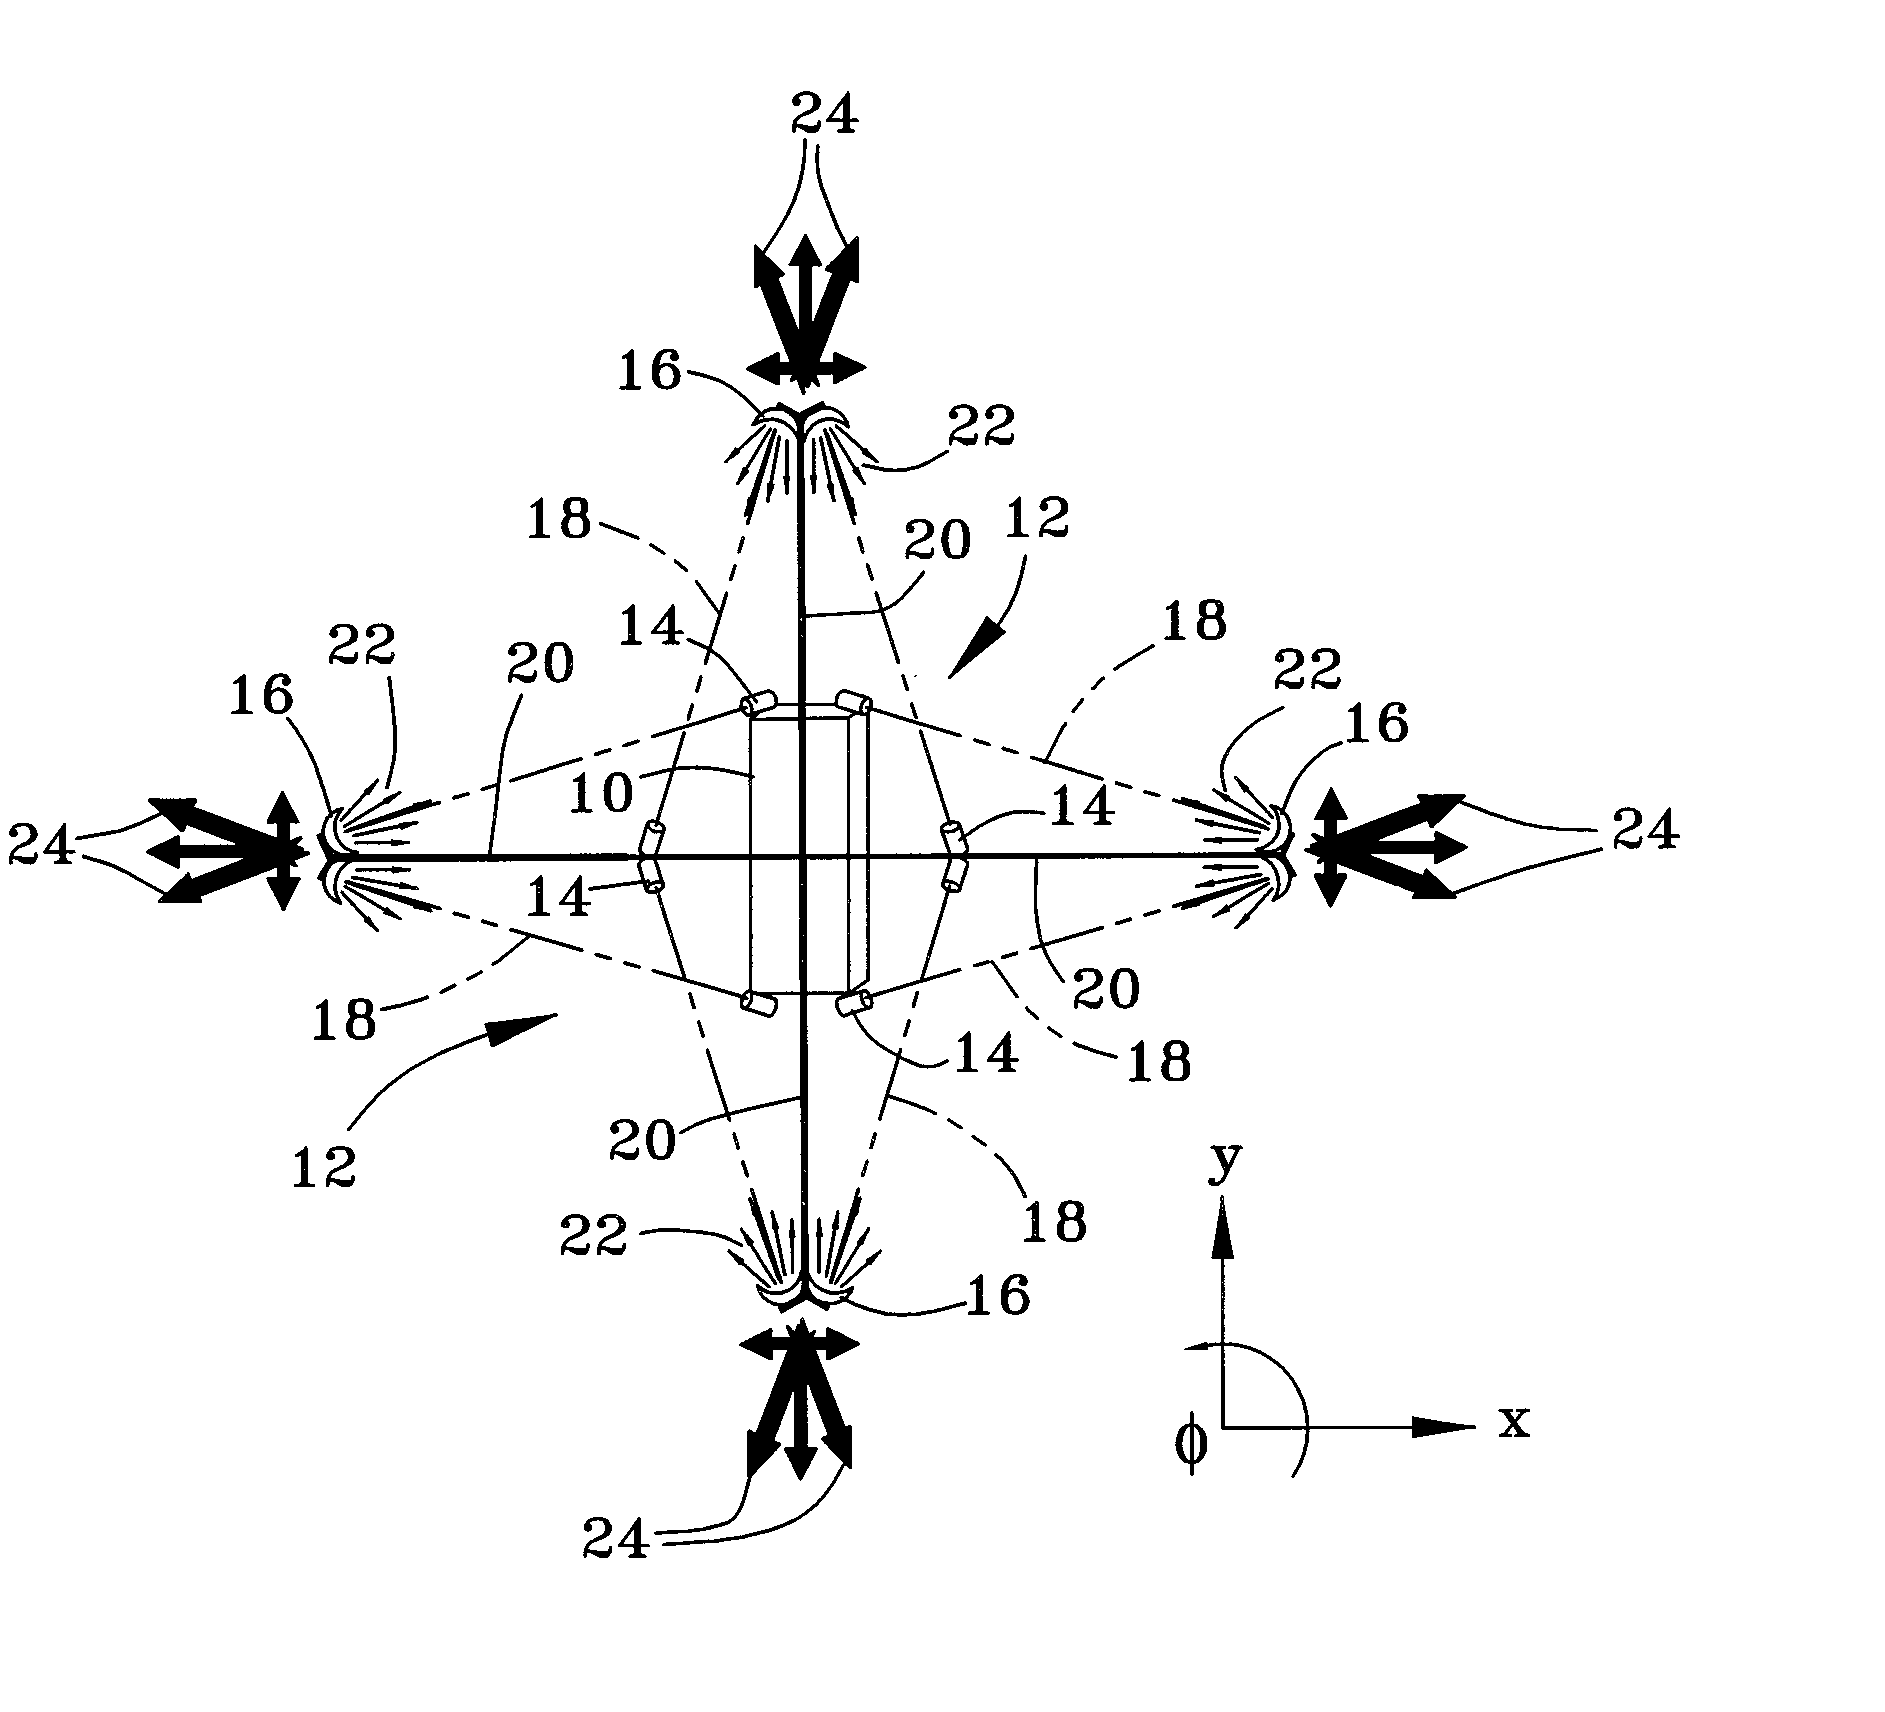 System and method for attitude control and station keeping